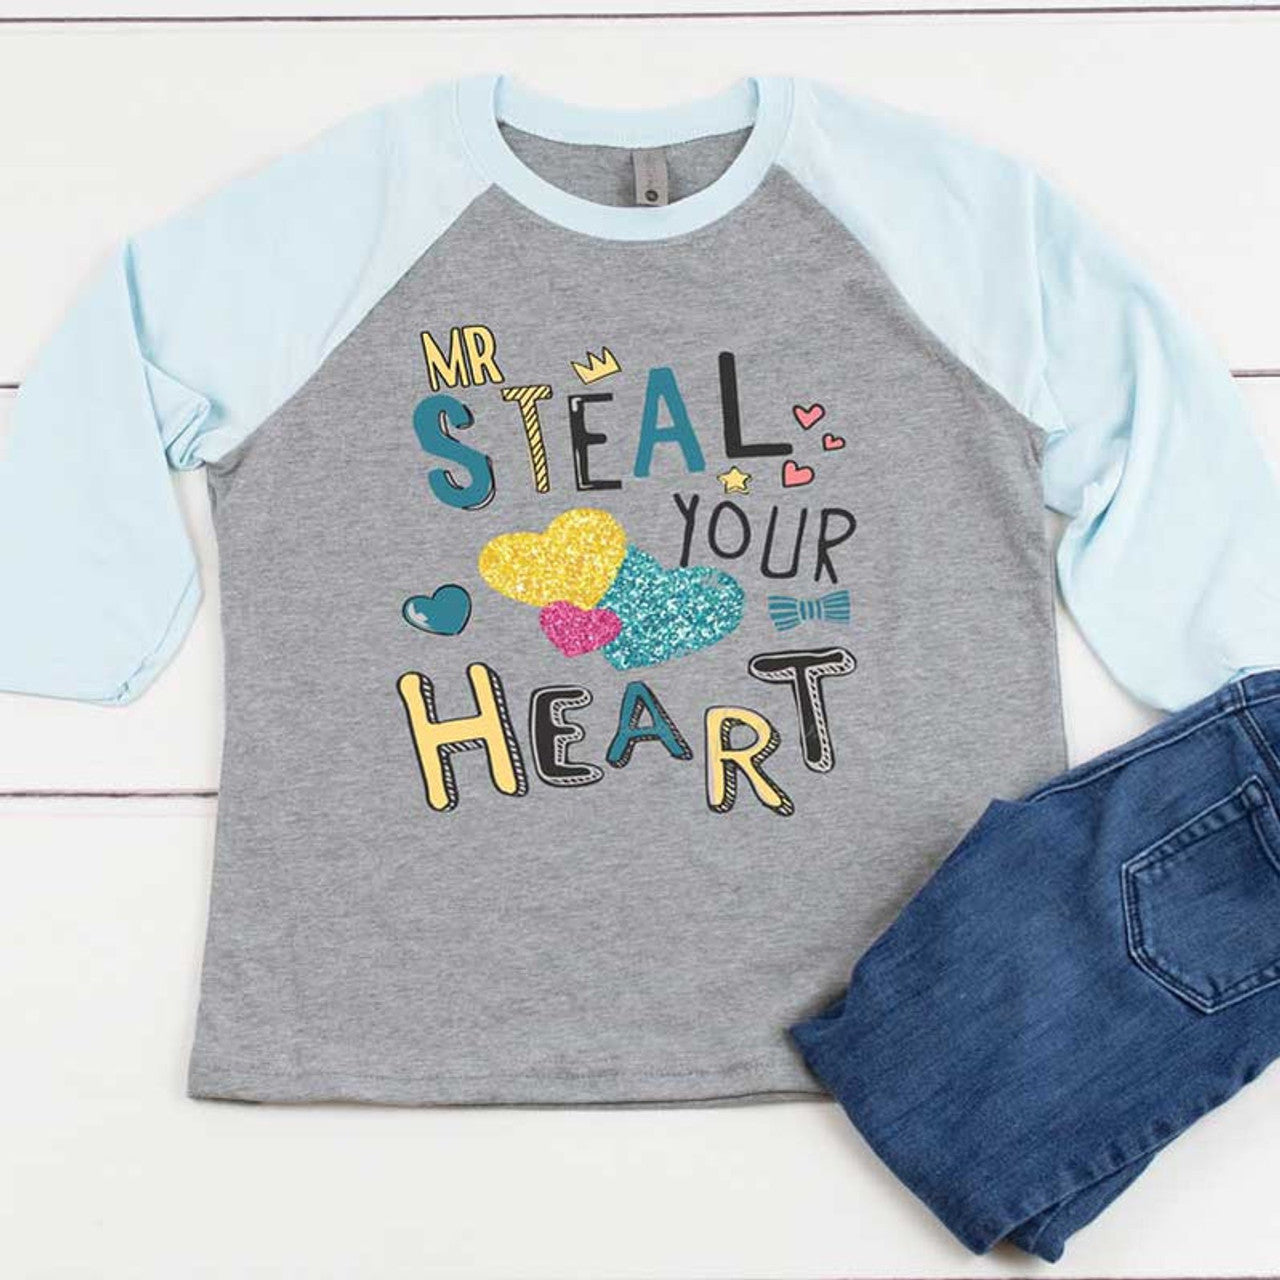 Mr. Steal Your Heart Youth Tee